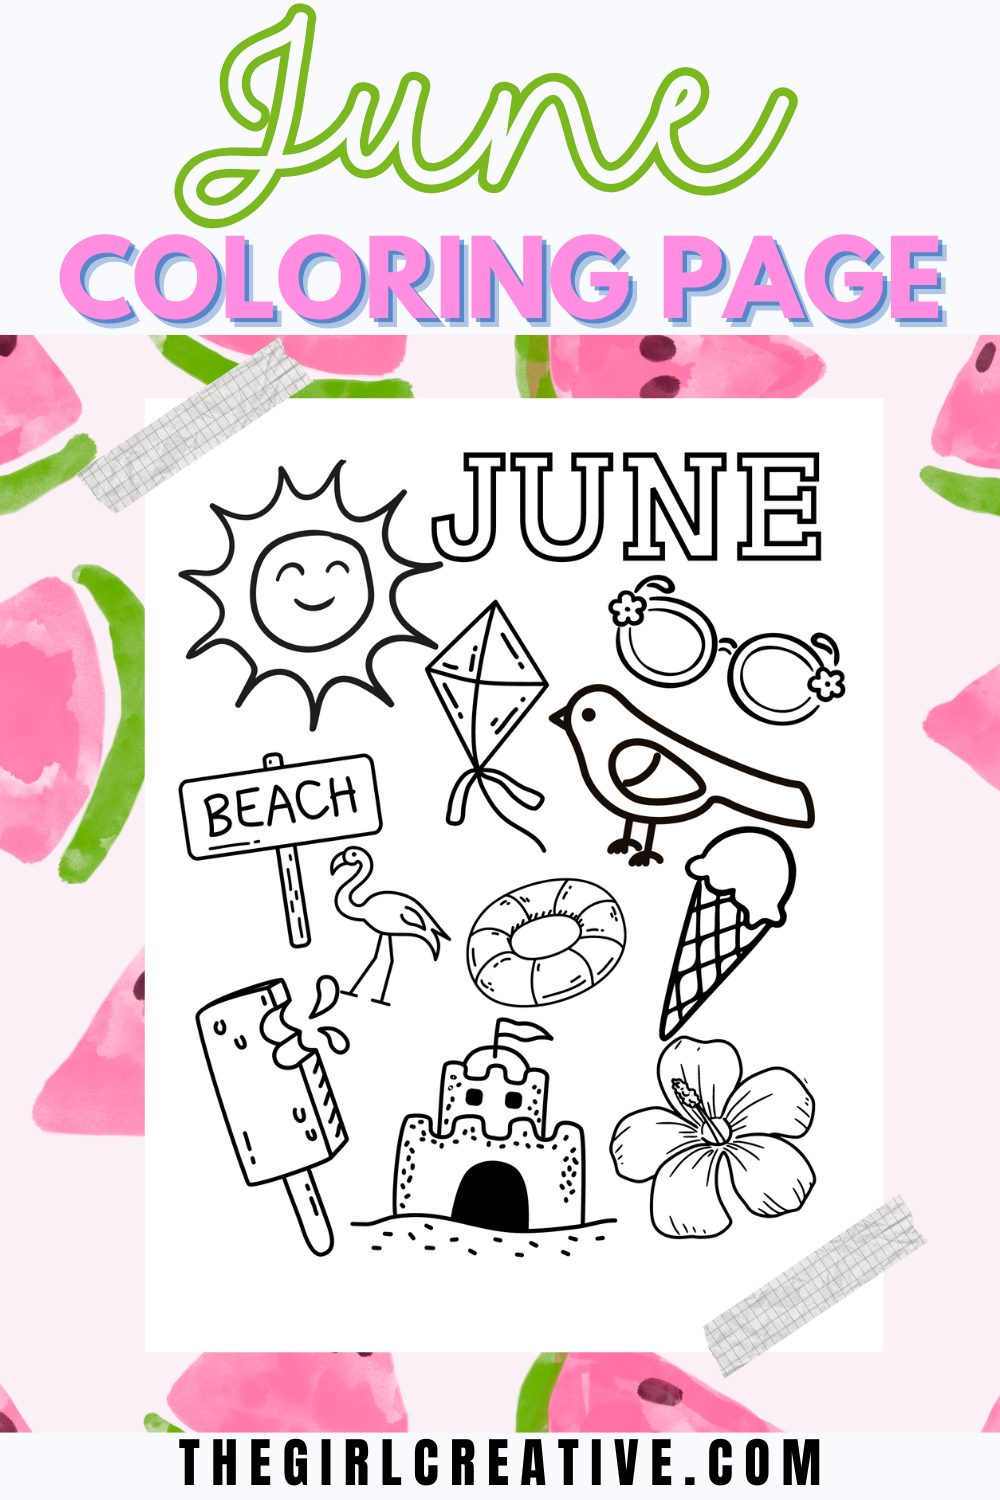 Free Printable Coloring Page for June